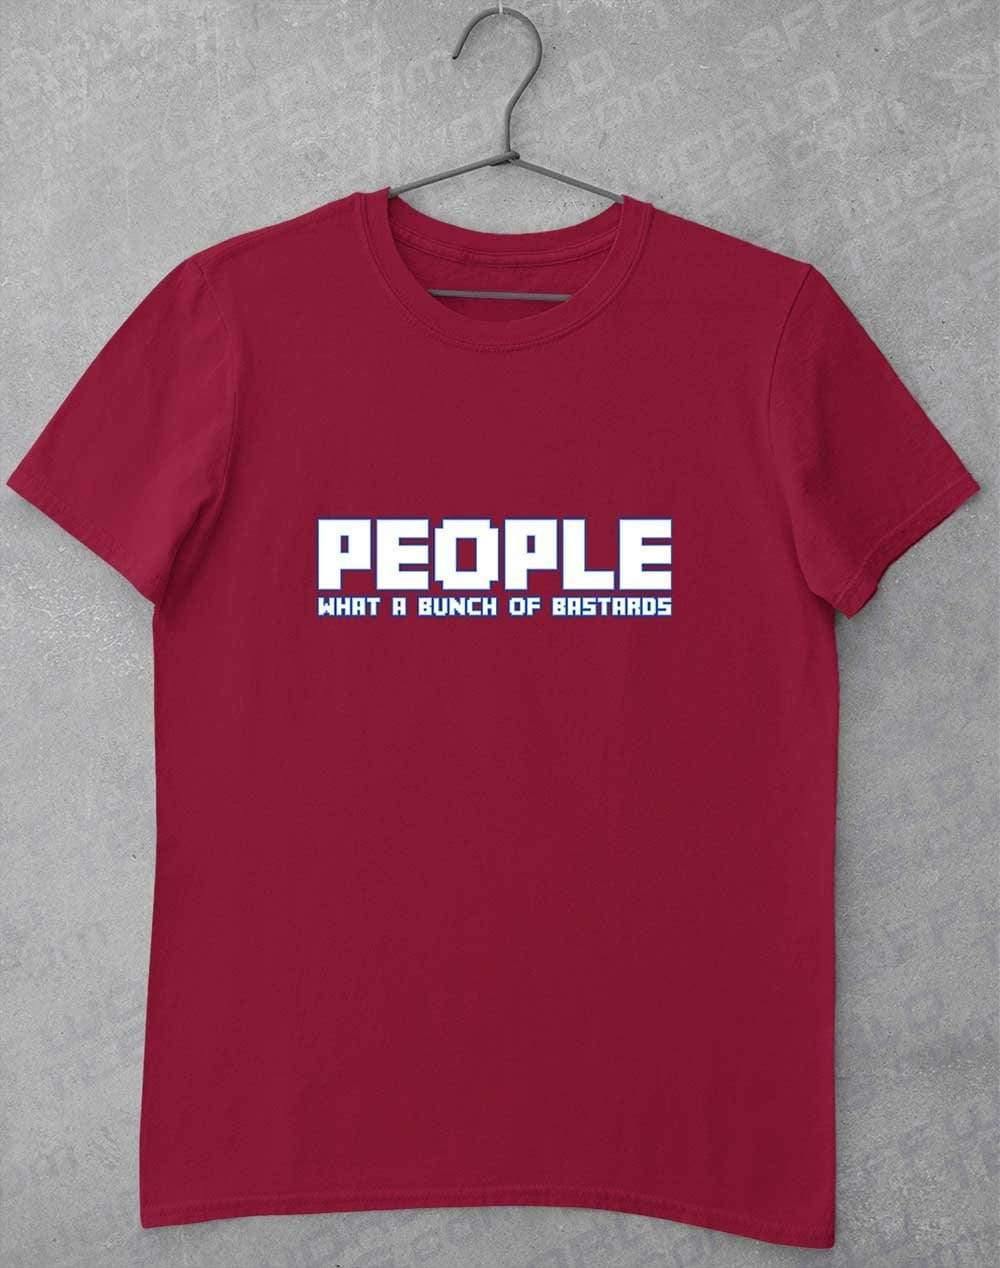 People = Bastards T-Shirt S / Red  - Off World Tees